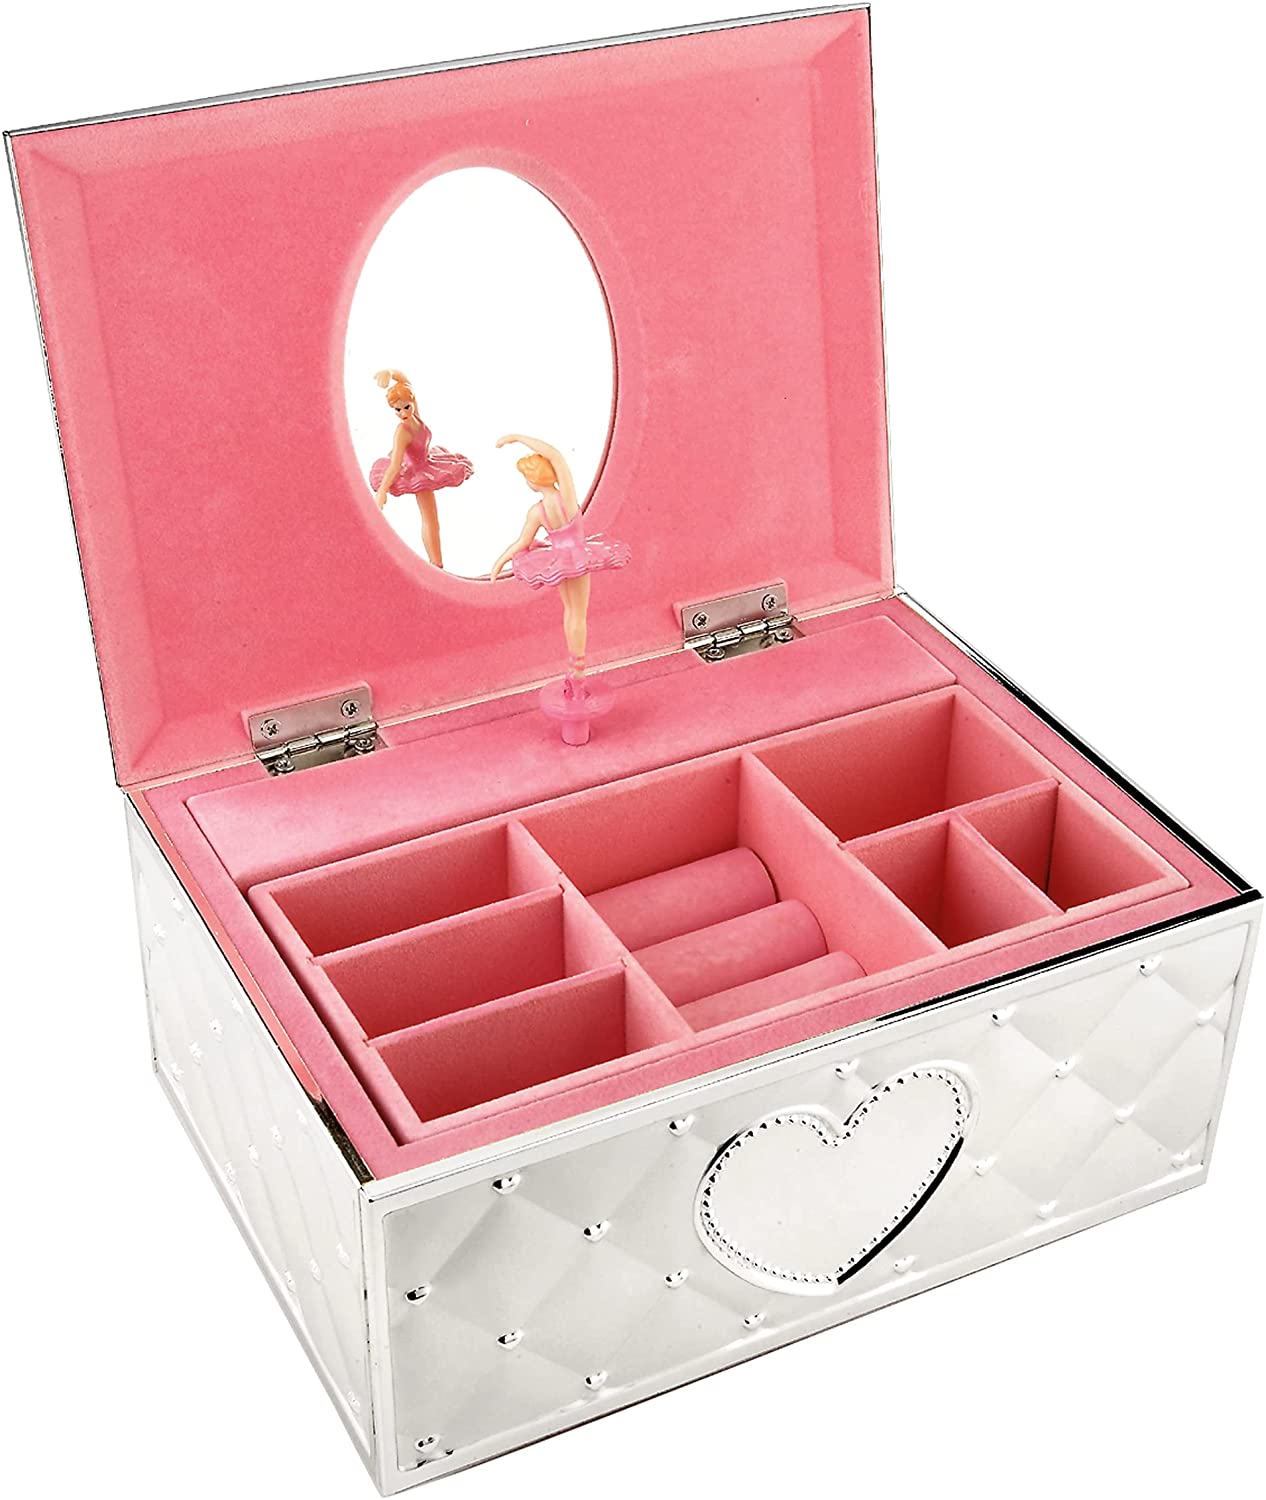 Lenox Silver-Plated Ballerina Jewelry Box For Girls